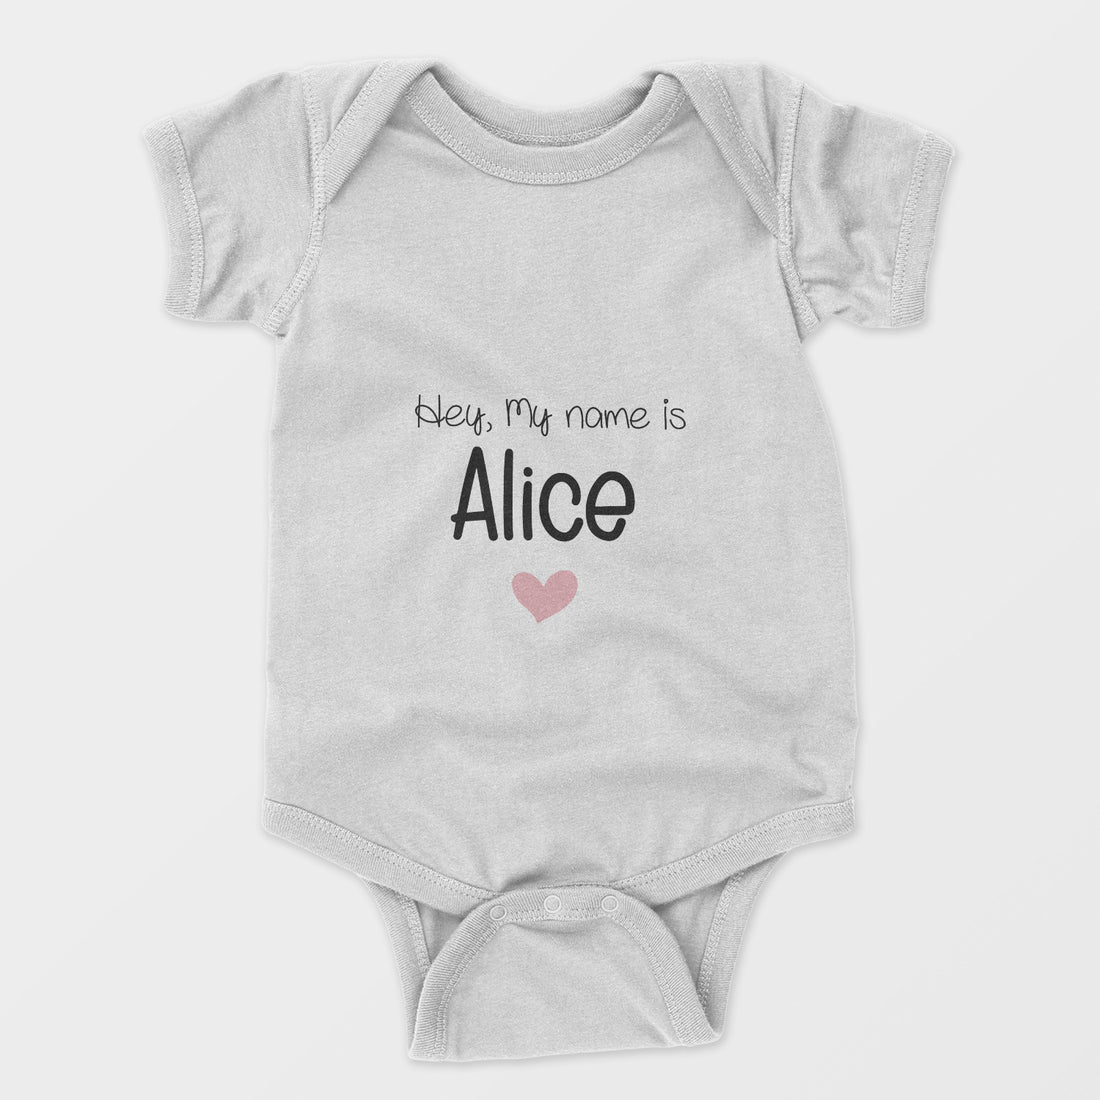 Personalized Baby Bodysuit Onesie For Newborn My Name is